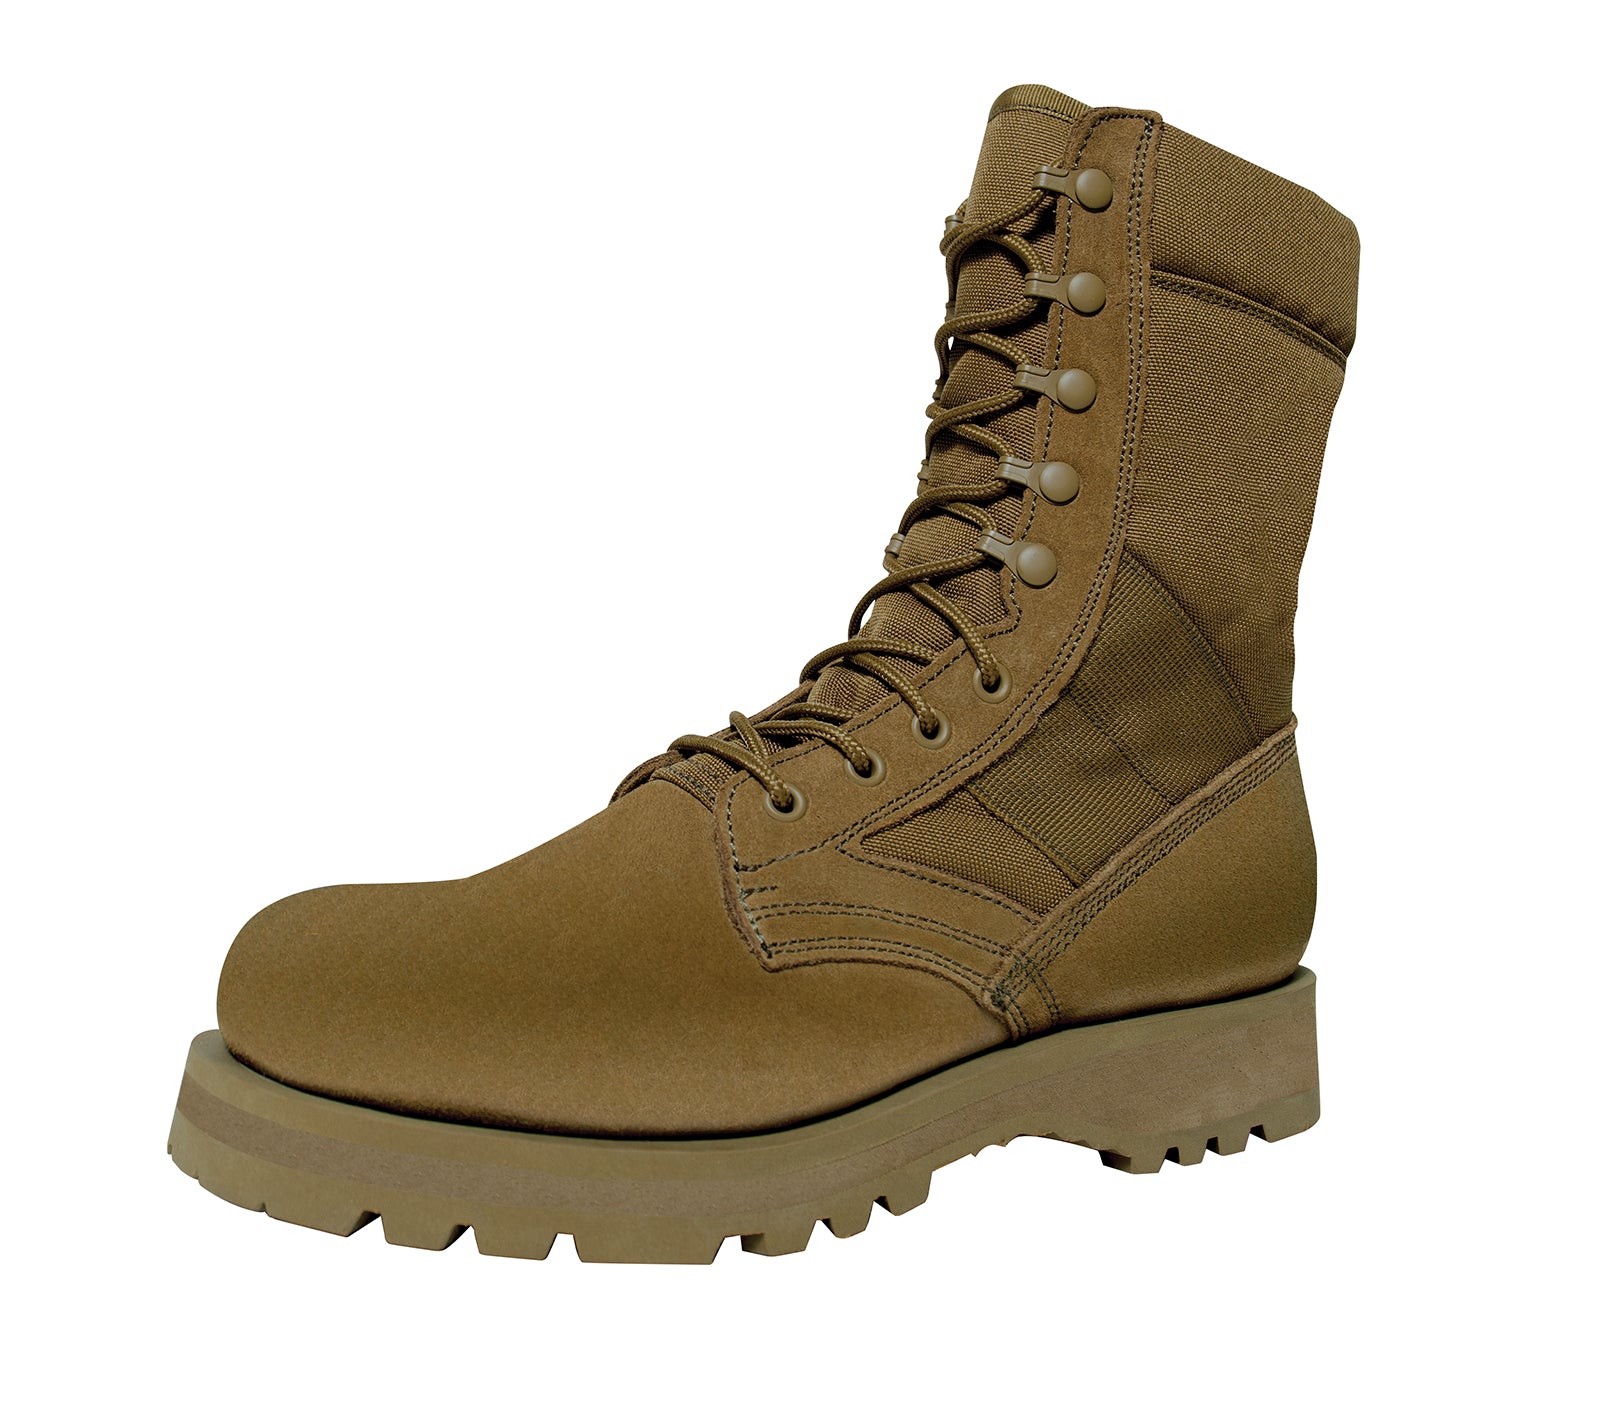 Type Sierra Sole Tactical Boots Rothco G.I 